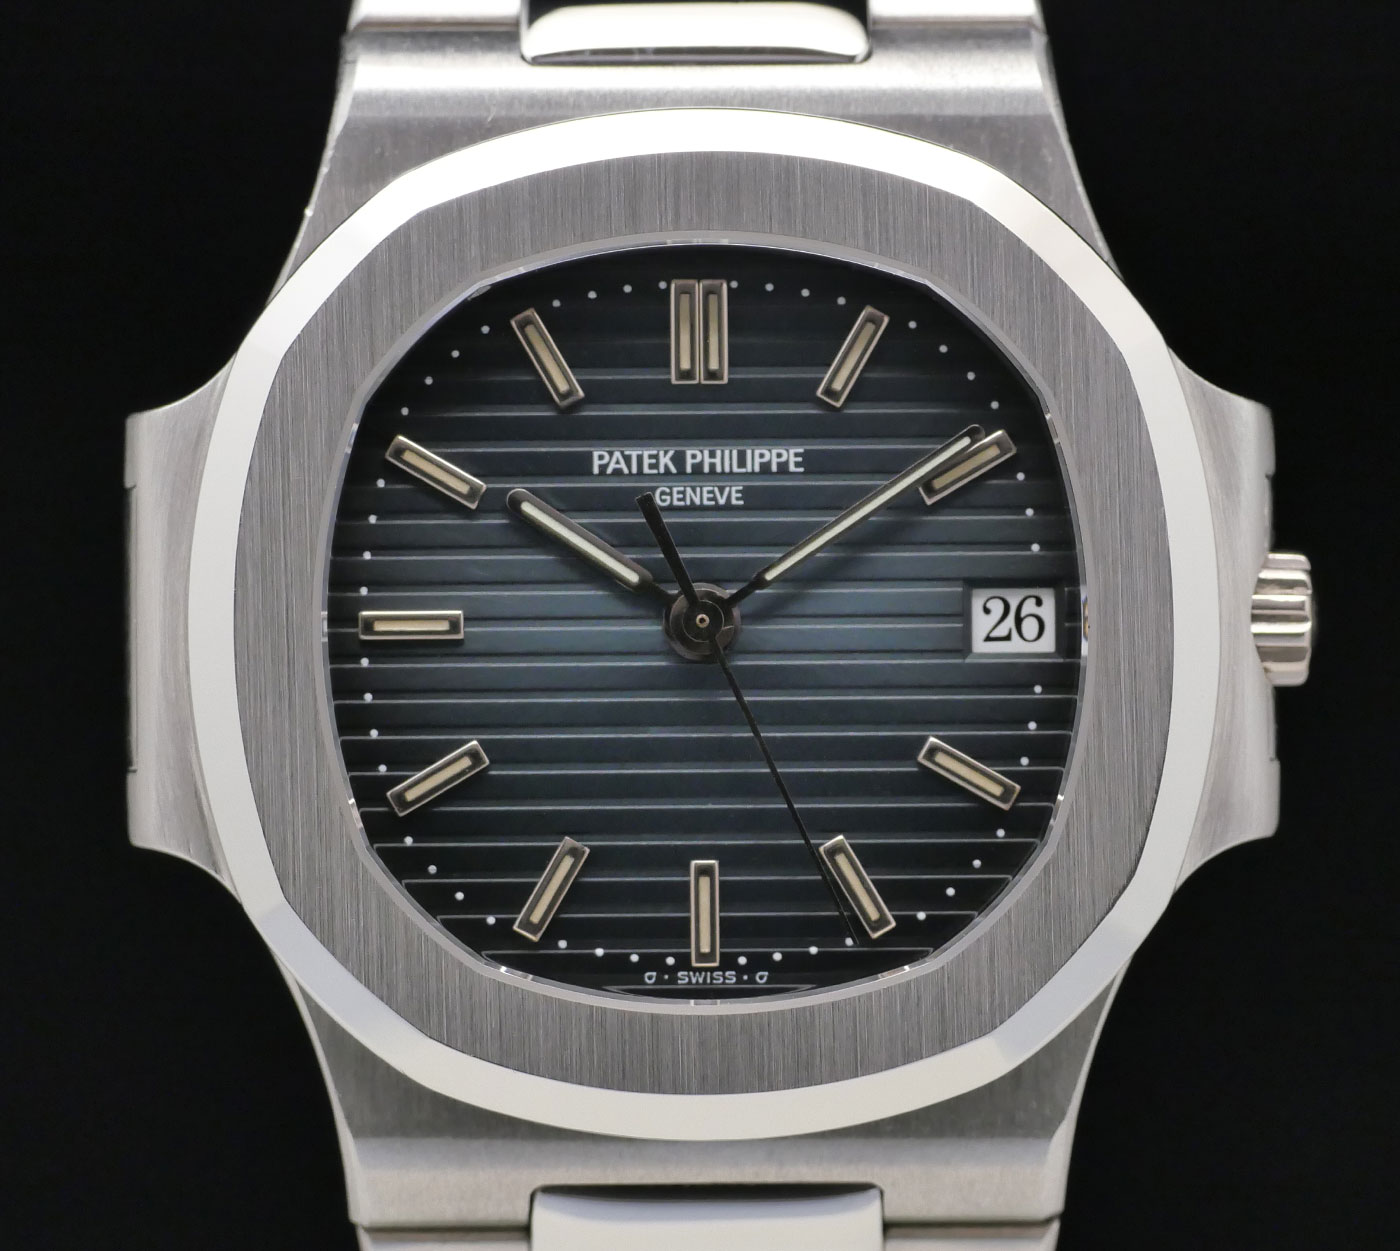 Patek Philippe 3800 with copy of extract of archieves - Watch Dealer